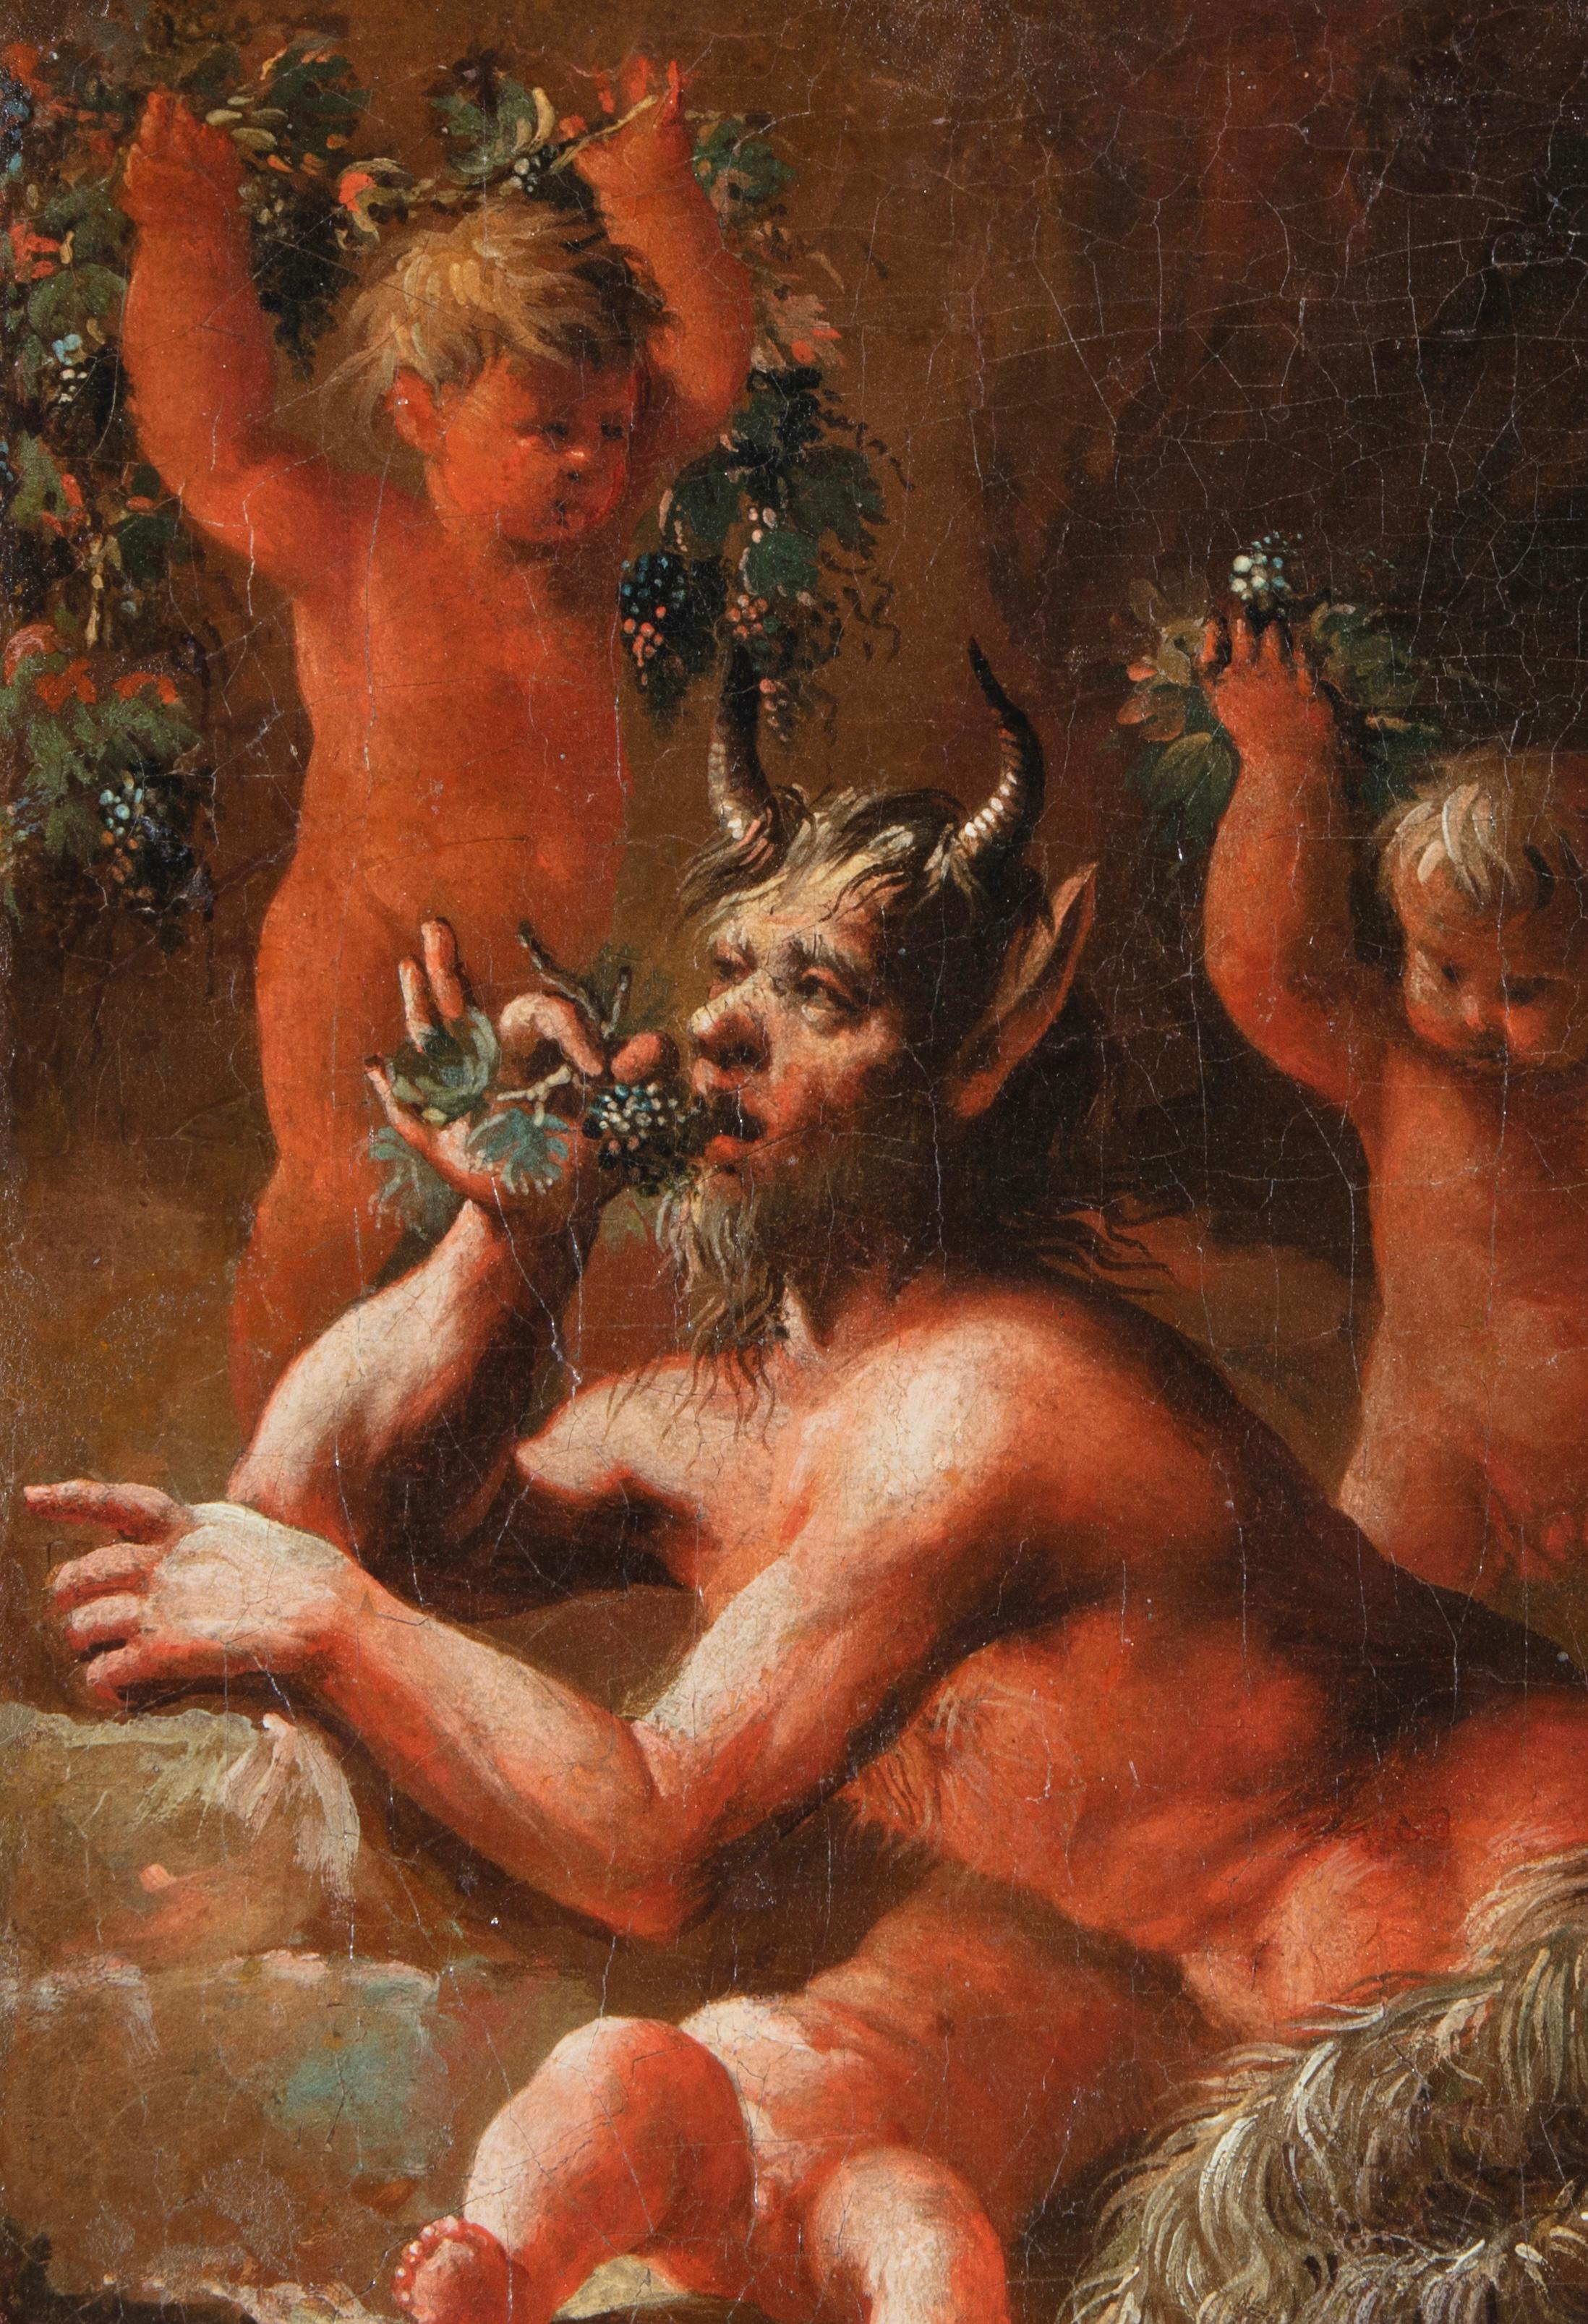 During a festive bacchanal a big satyr is eating grapes, lying on the ground and surrounded by a large group of putti who, with festoons and vine leaves, fill and populate the pictorial composition.

The cerulean tones of the sky juxtaposed with the